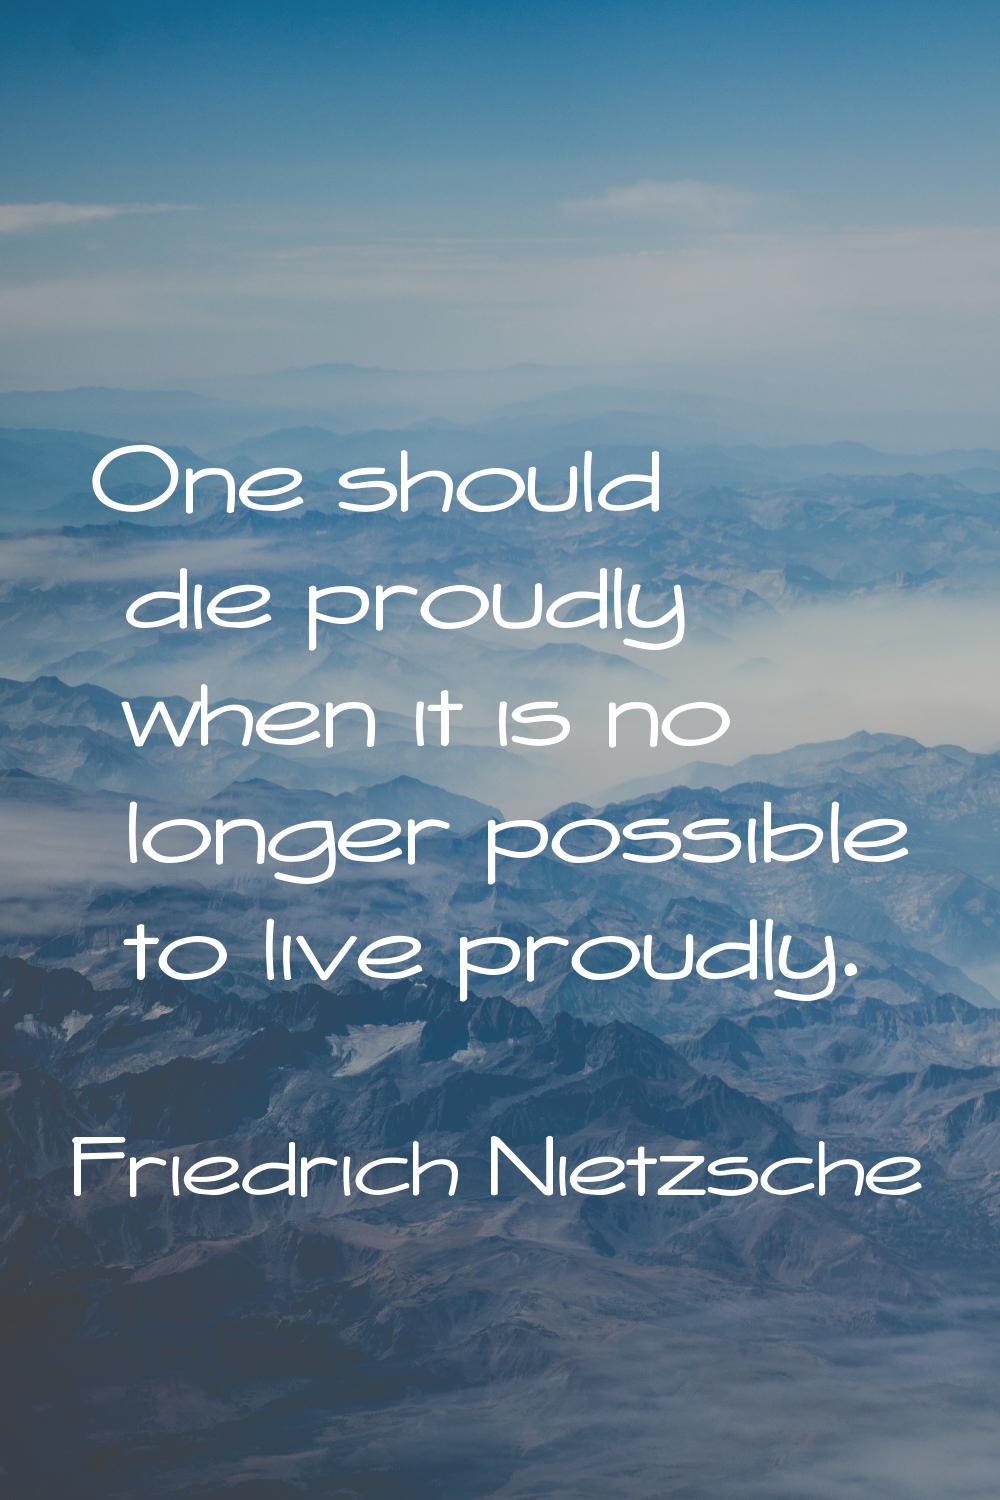 One should die proudly when it is no longer possible to live proudly.